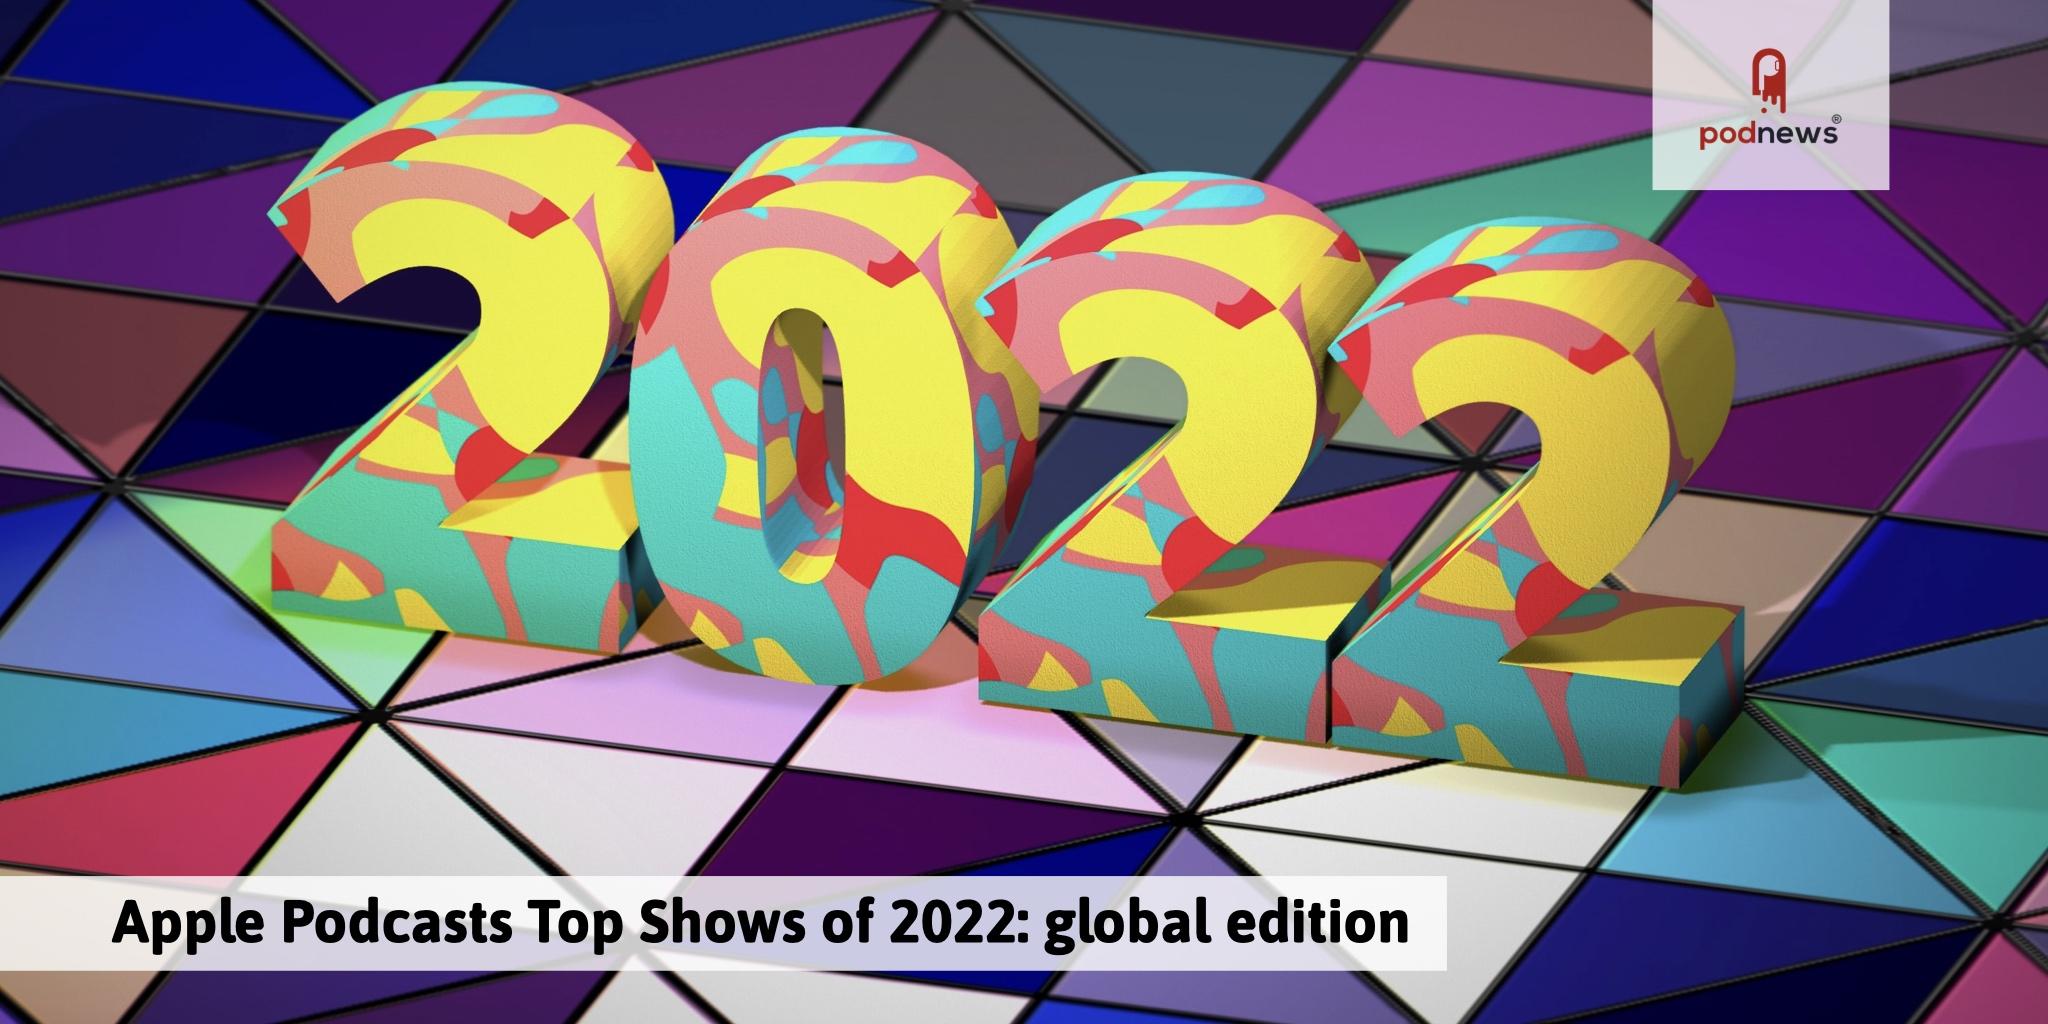 Apple Top Shows of 2022: global edition